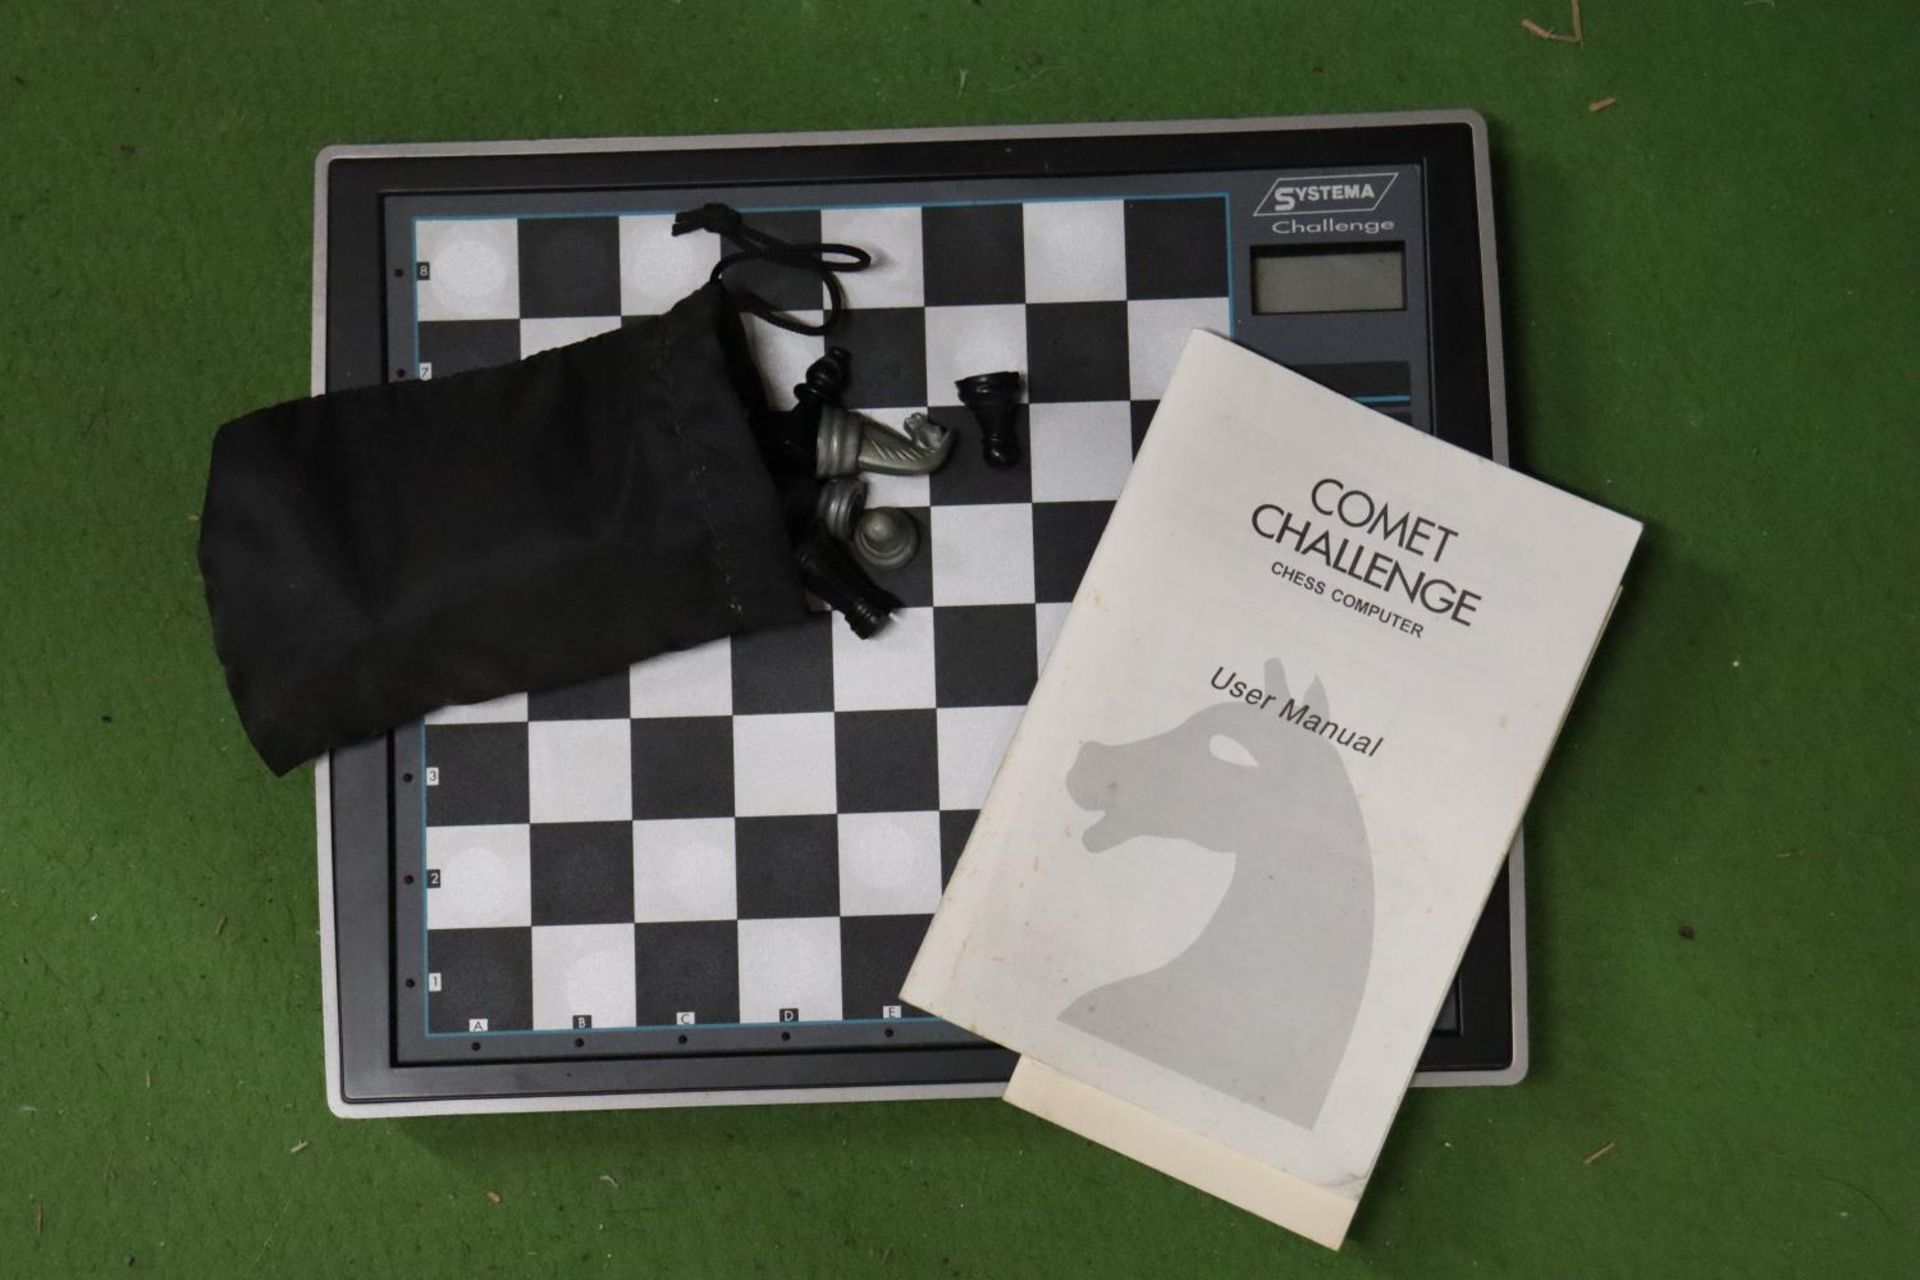 A COMET CHALLENGE CHESS COMPUTER WITH MANUAL